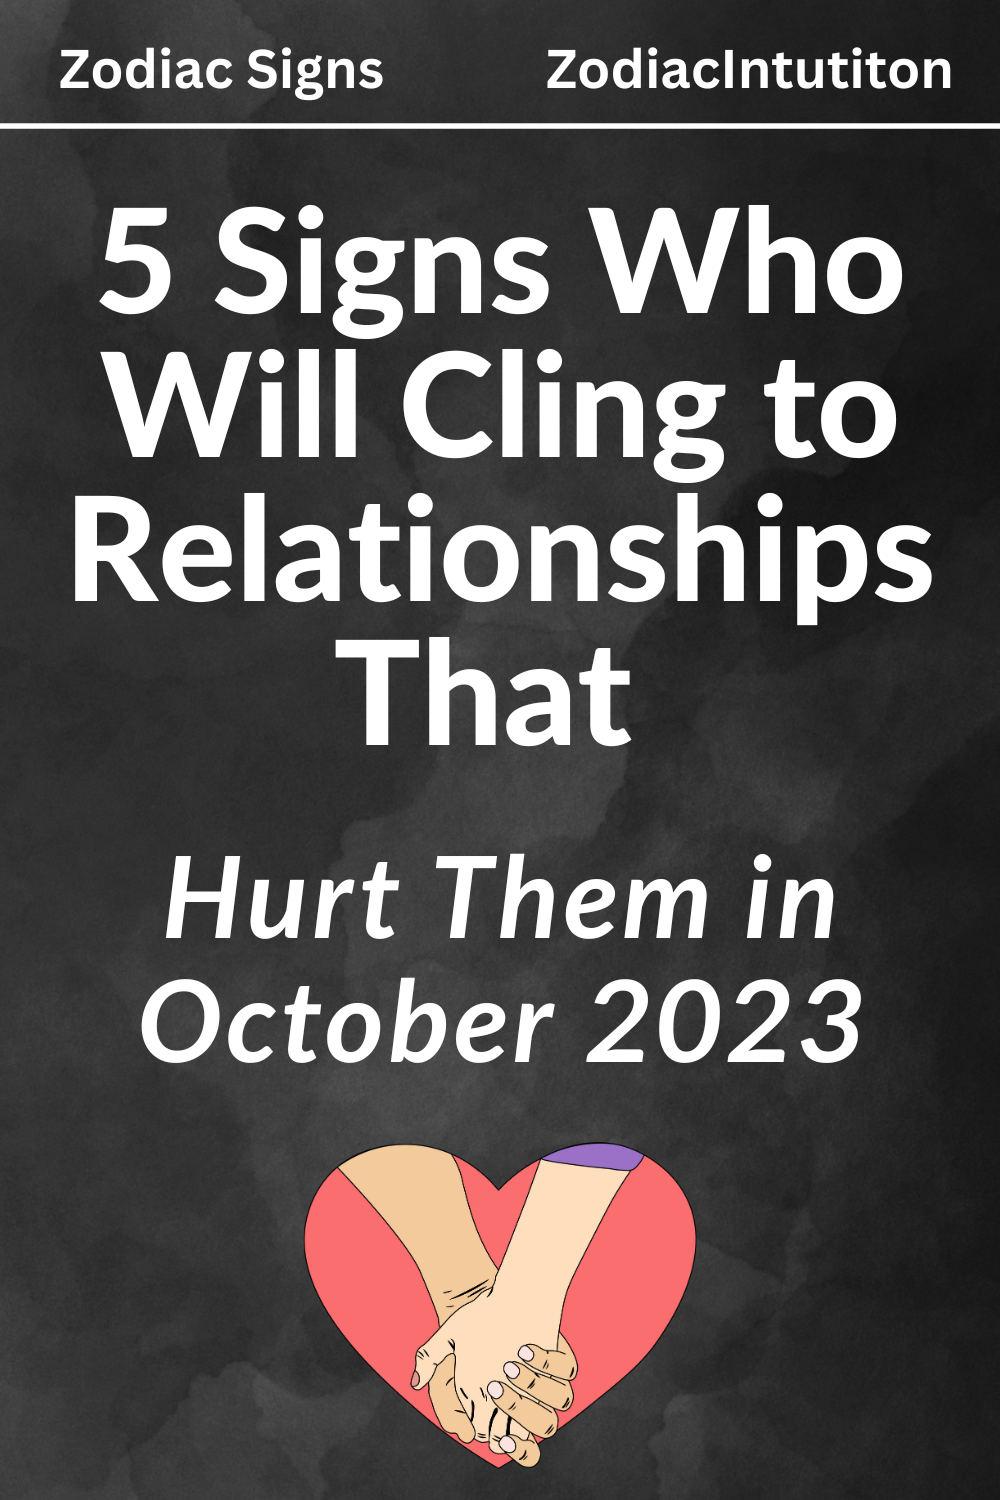 5 Signs Who Will Cling to Relationships That Hurt Them in October 2023